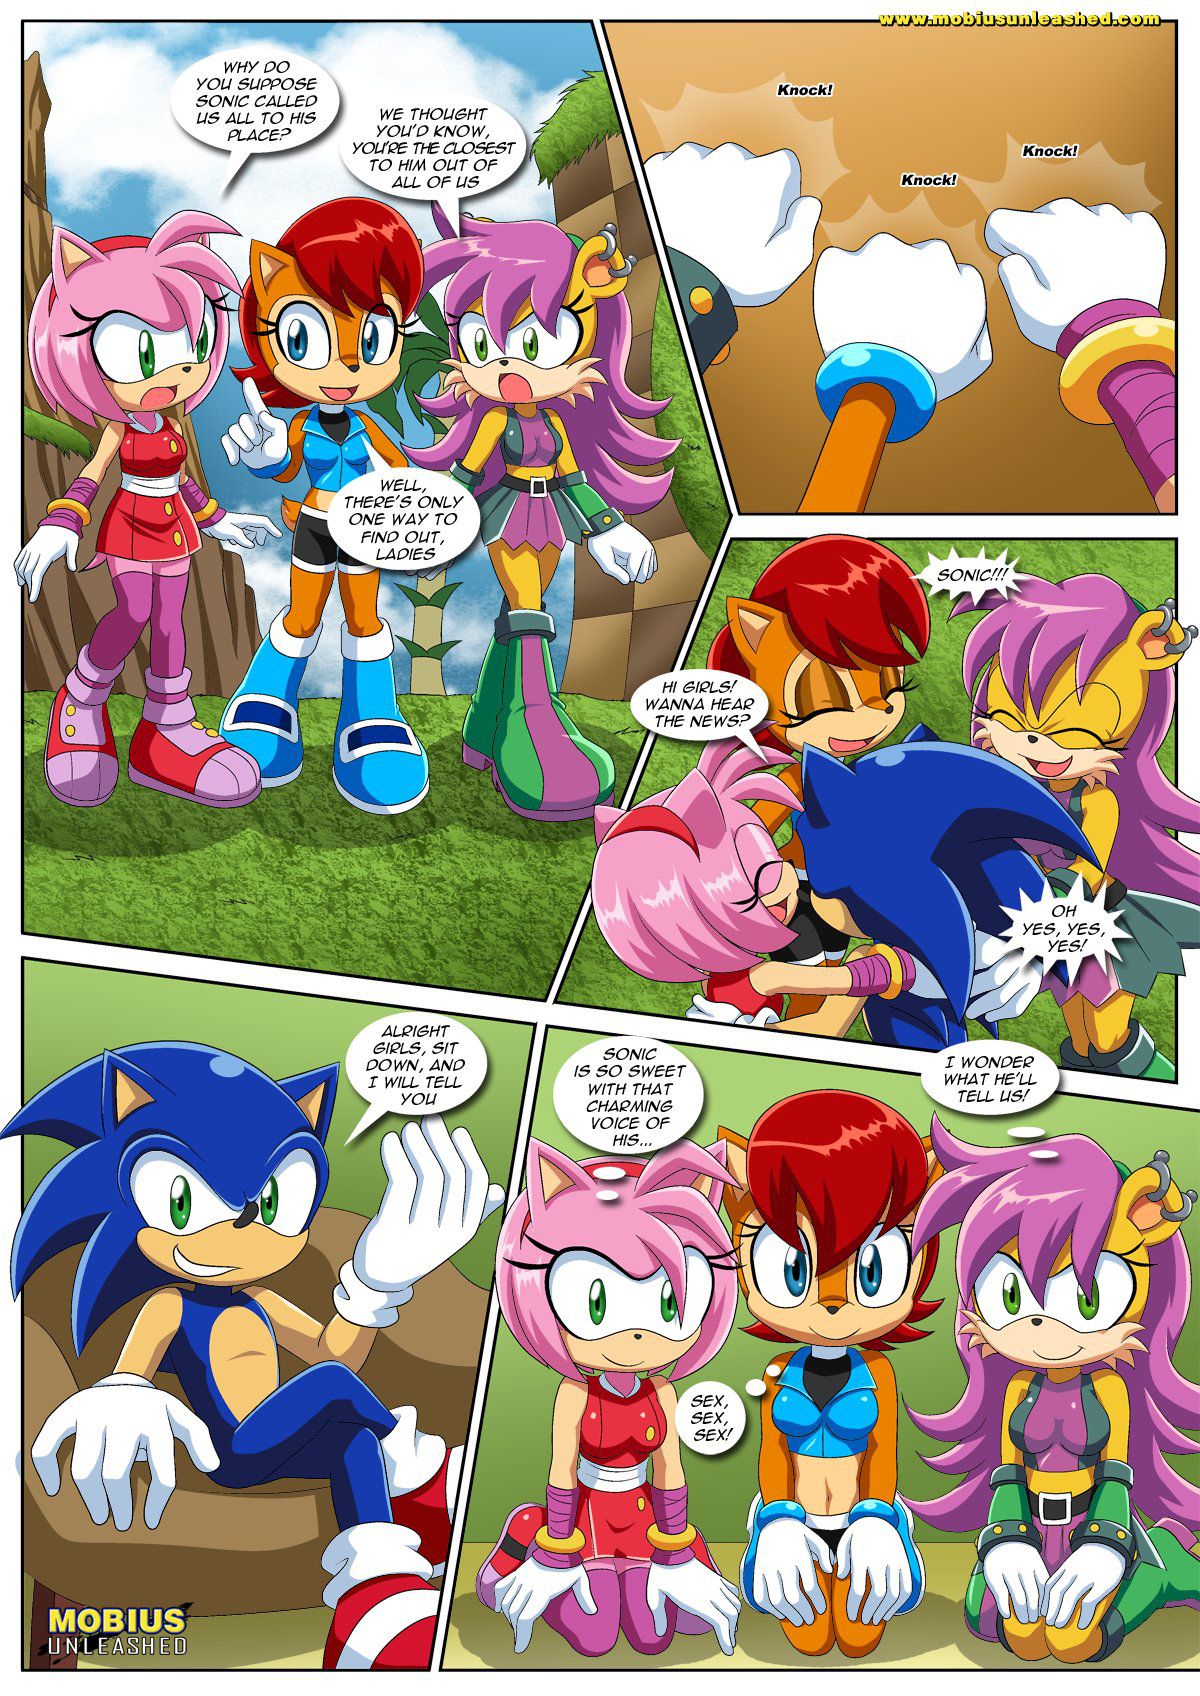 [Palcomix] Sonic Project XXX 4 (Sonic The Hedgehog) [Ongoing] 2